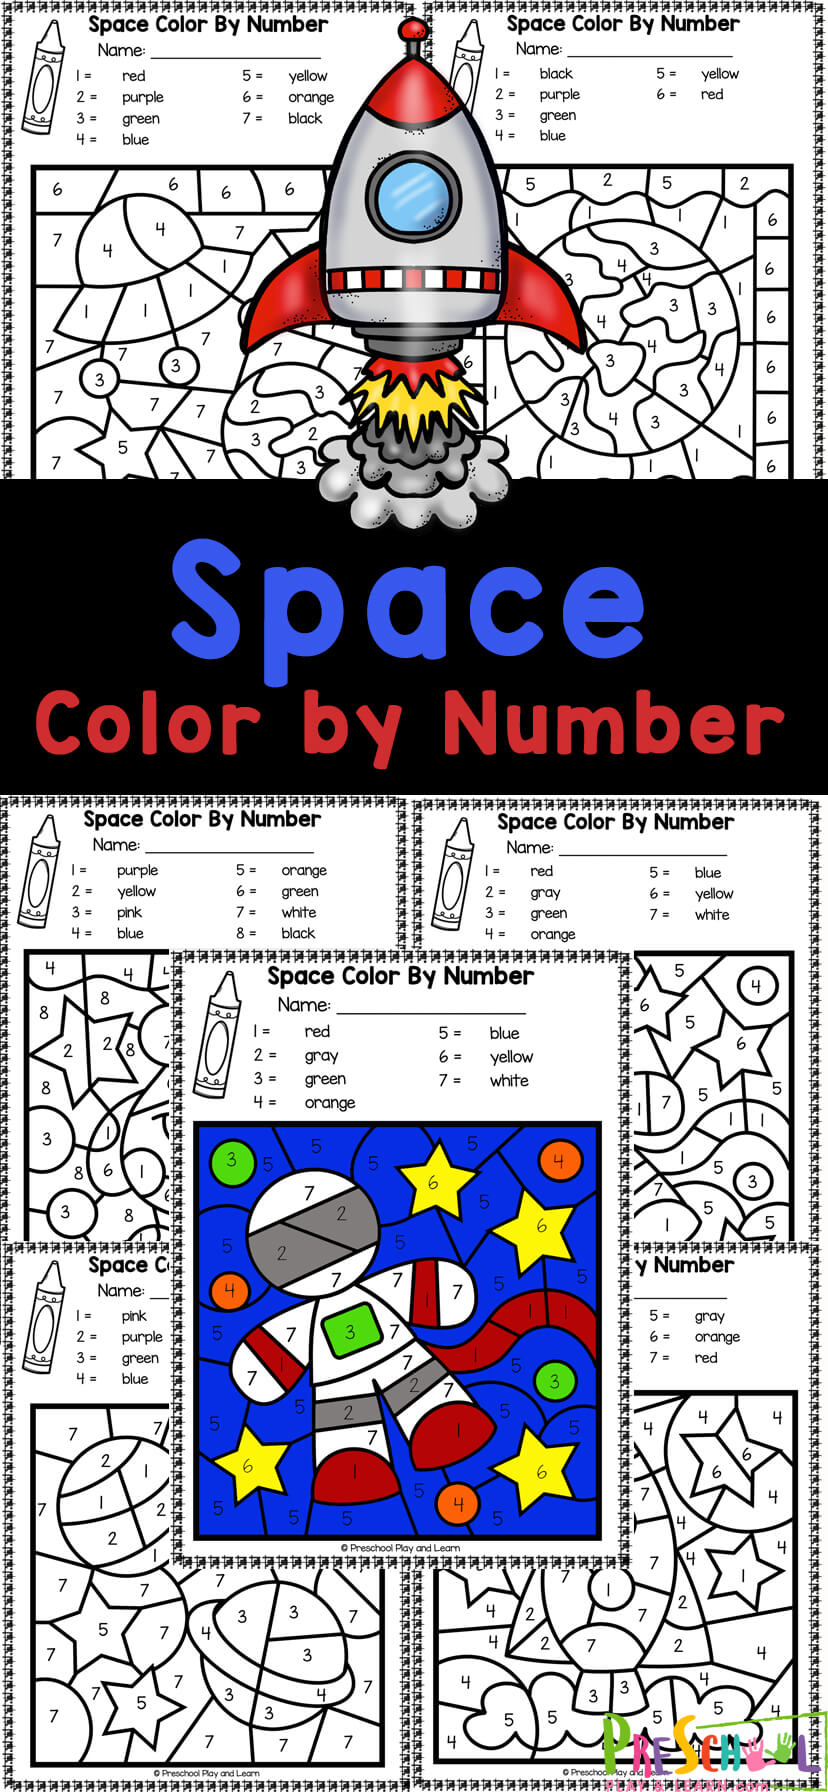  FREE Printable Outer Space Color By Number Preschool Worksheet